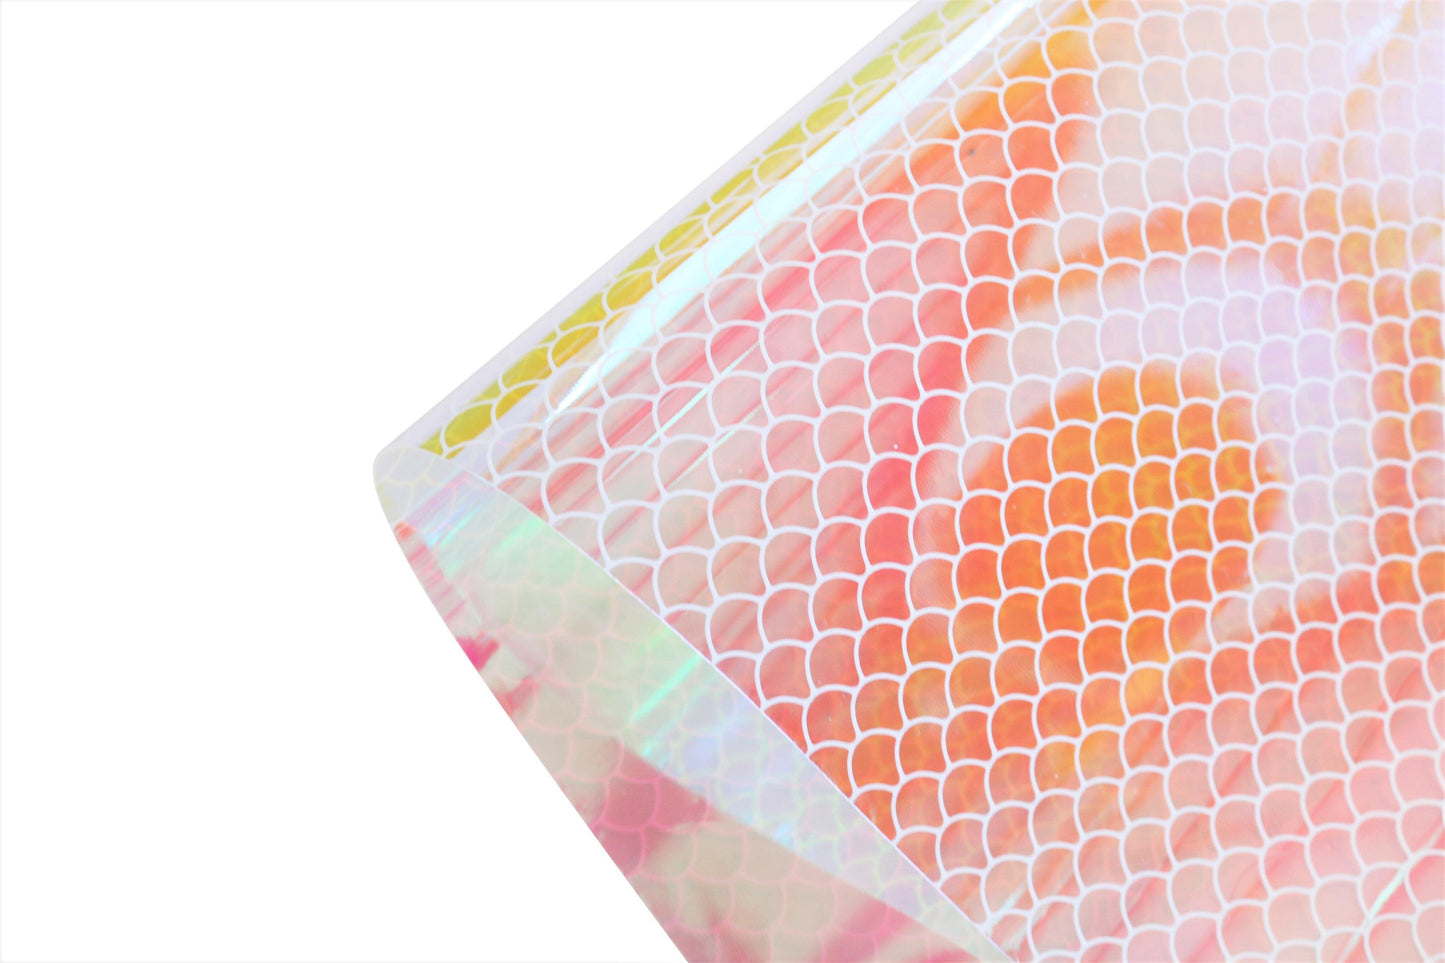 Holographic Ombre Jelly Sheets - Pretty in Pink Supply